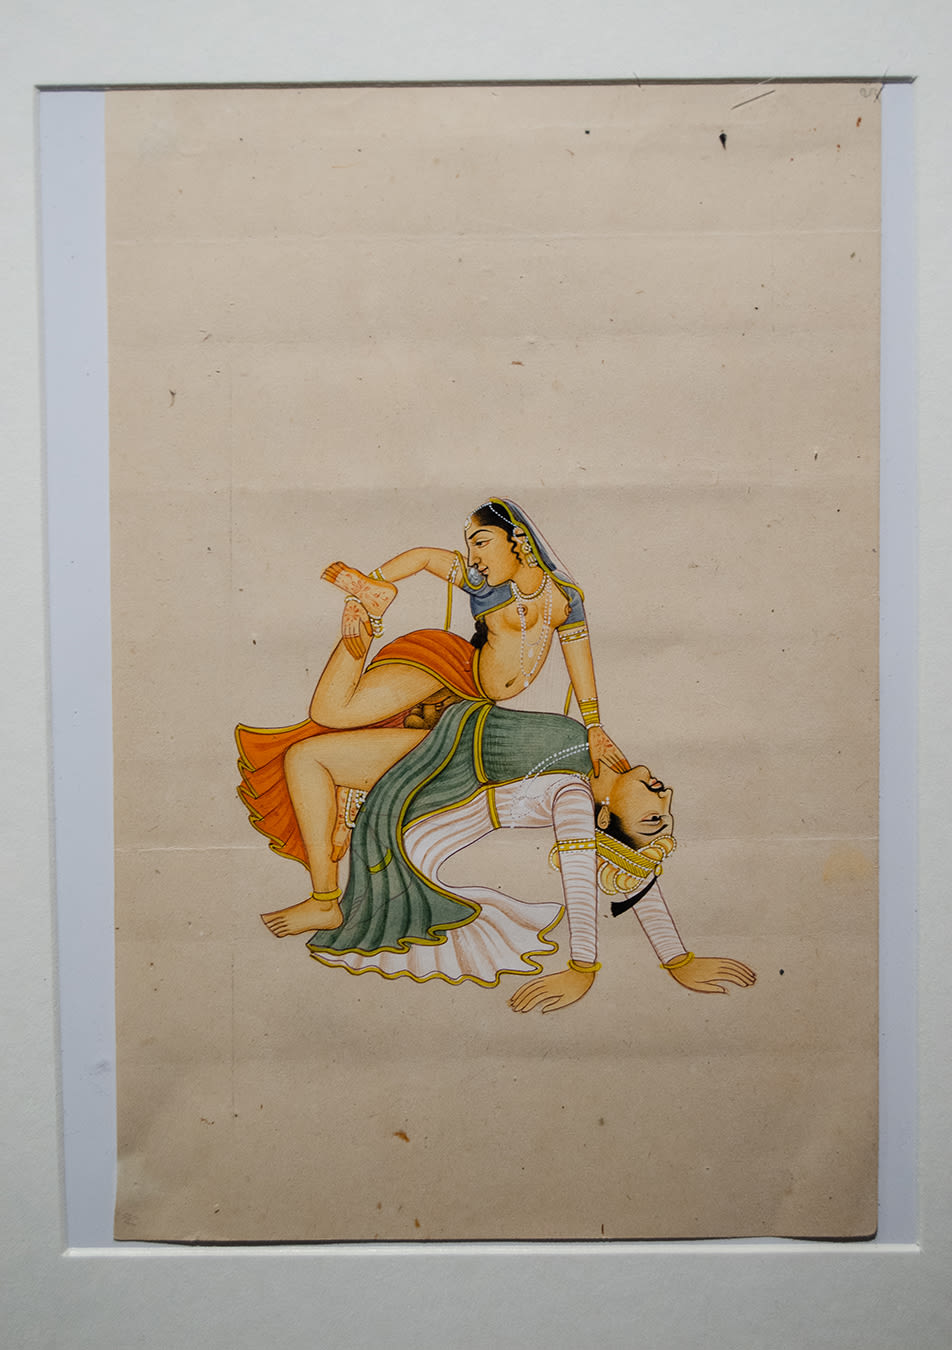 143 - Late Mughal Empire Erotic Manuscript / Painting Inspired by the Kama  Sutra, 18th Century CE - 19th Century CE | Barakat Gallery